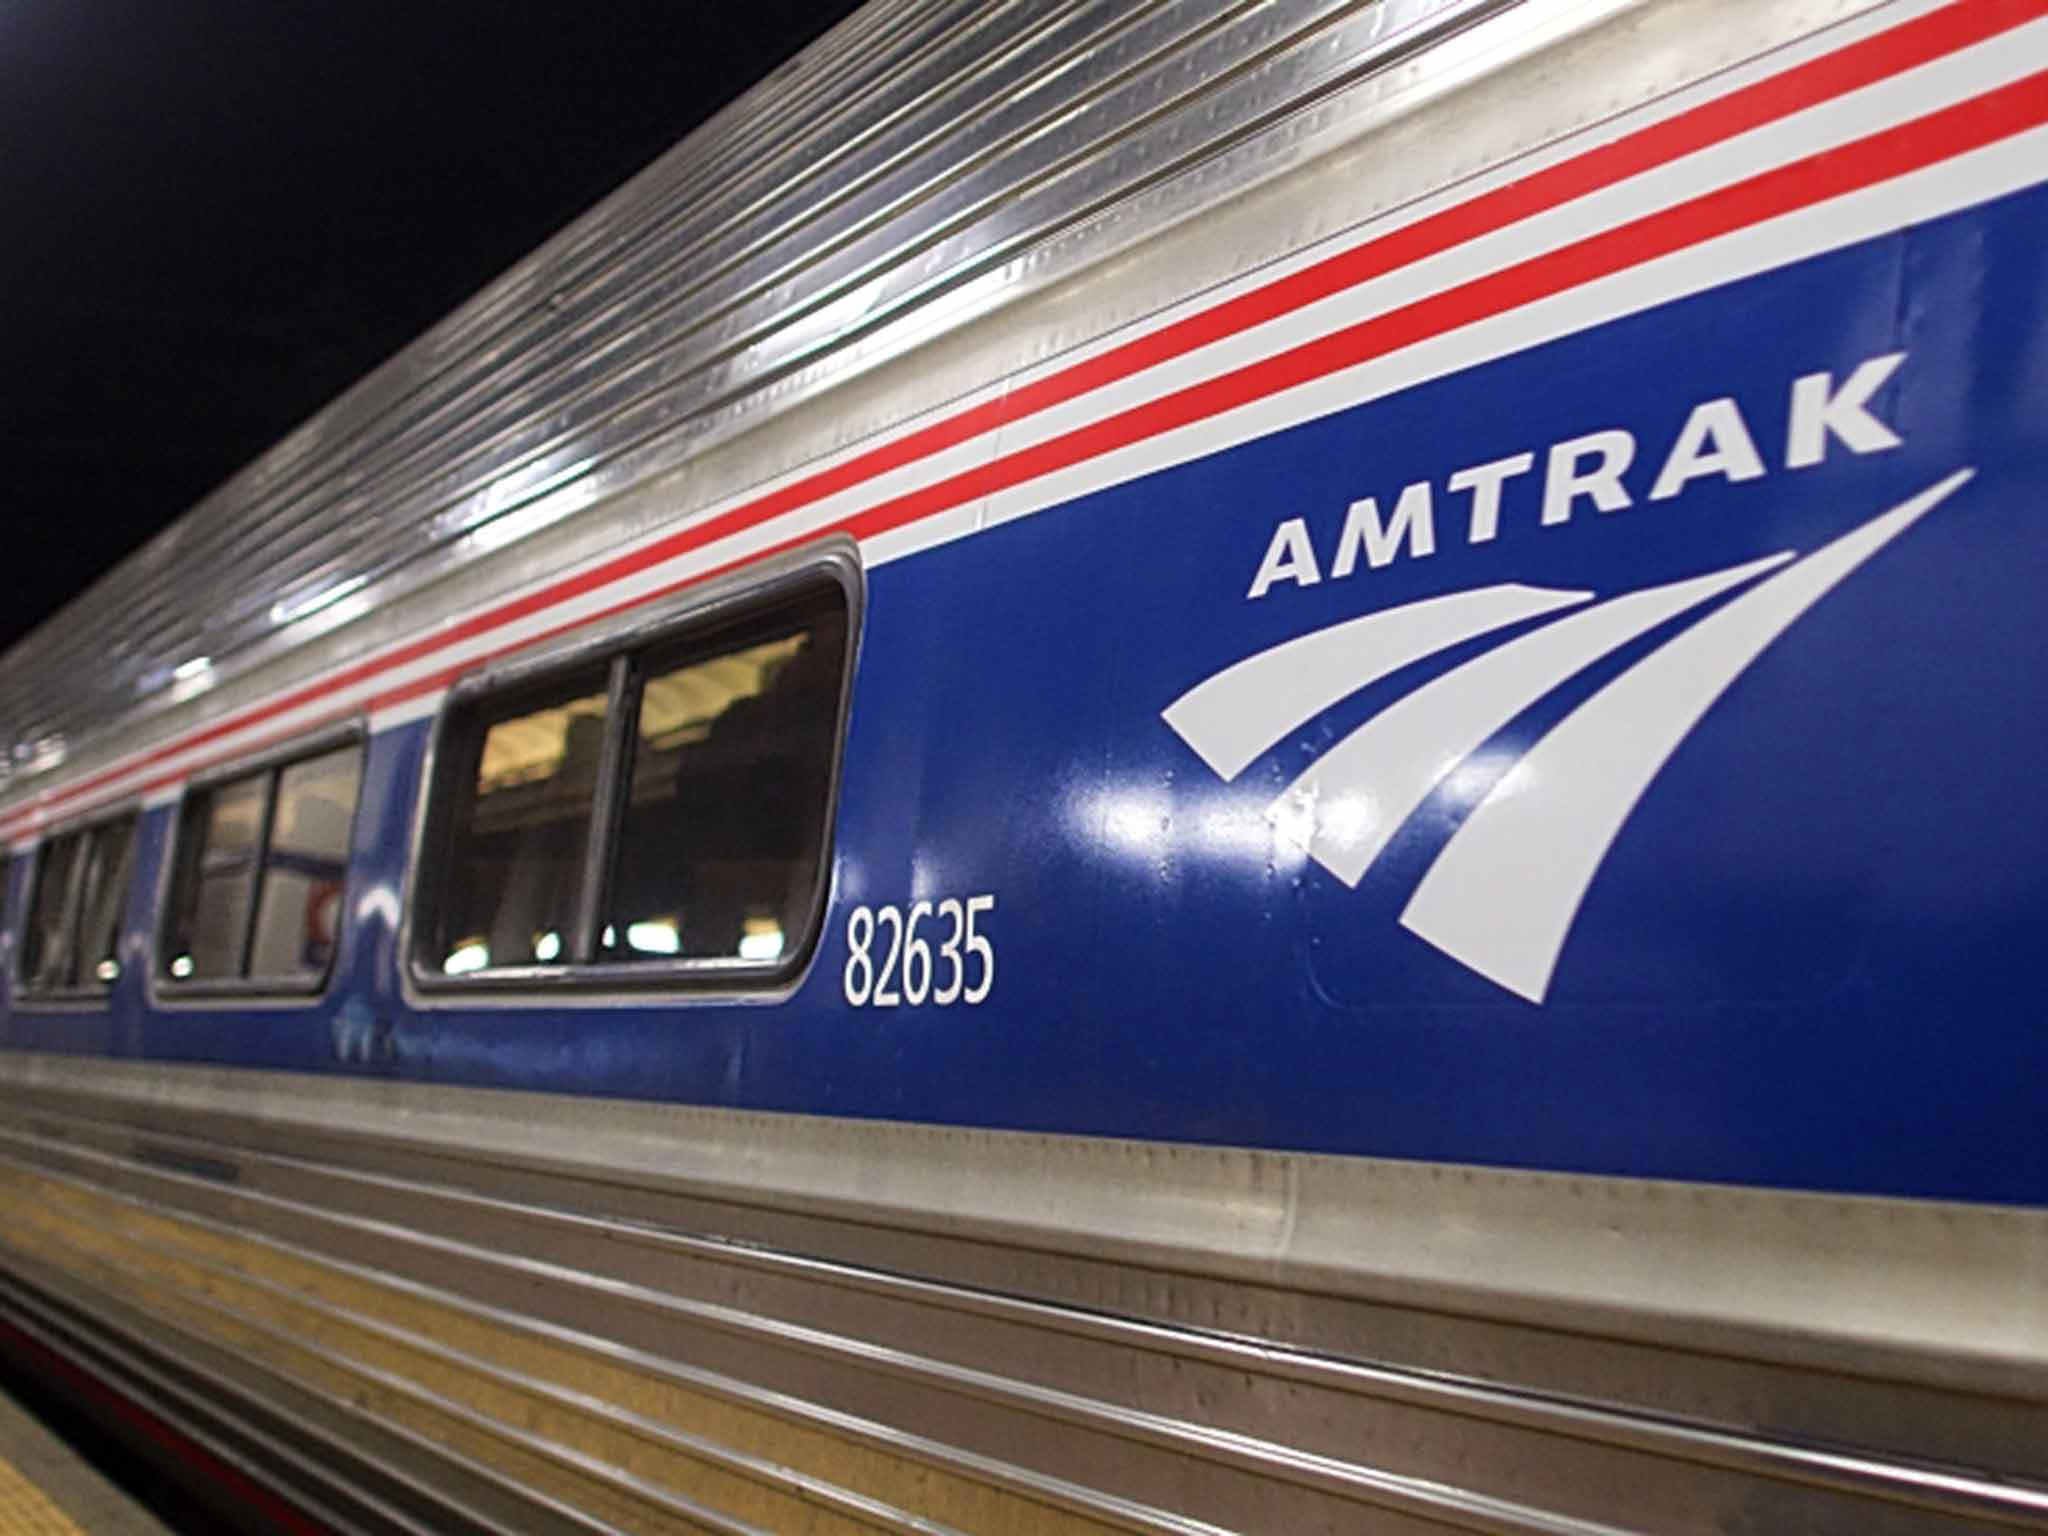 Amtrak trains are starting to resume